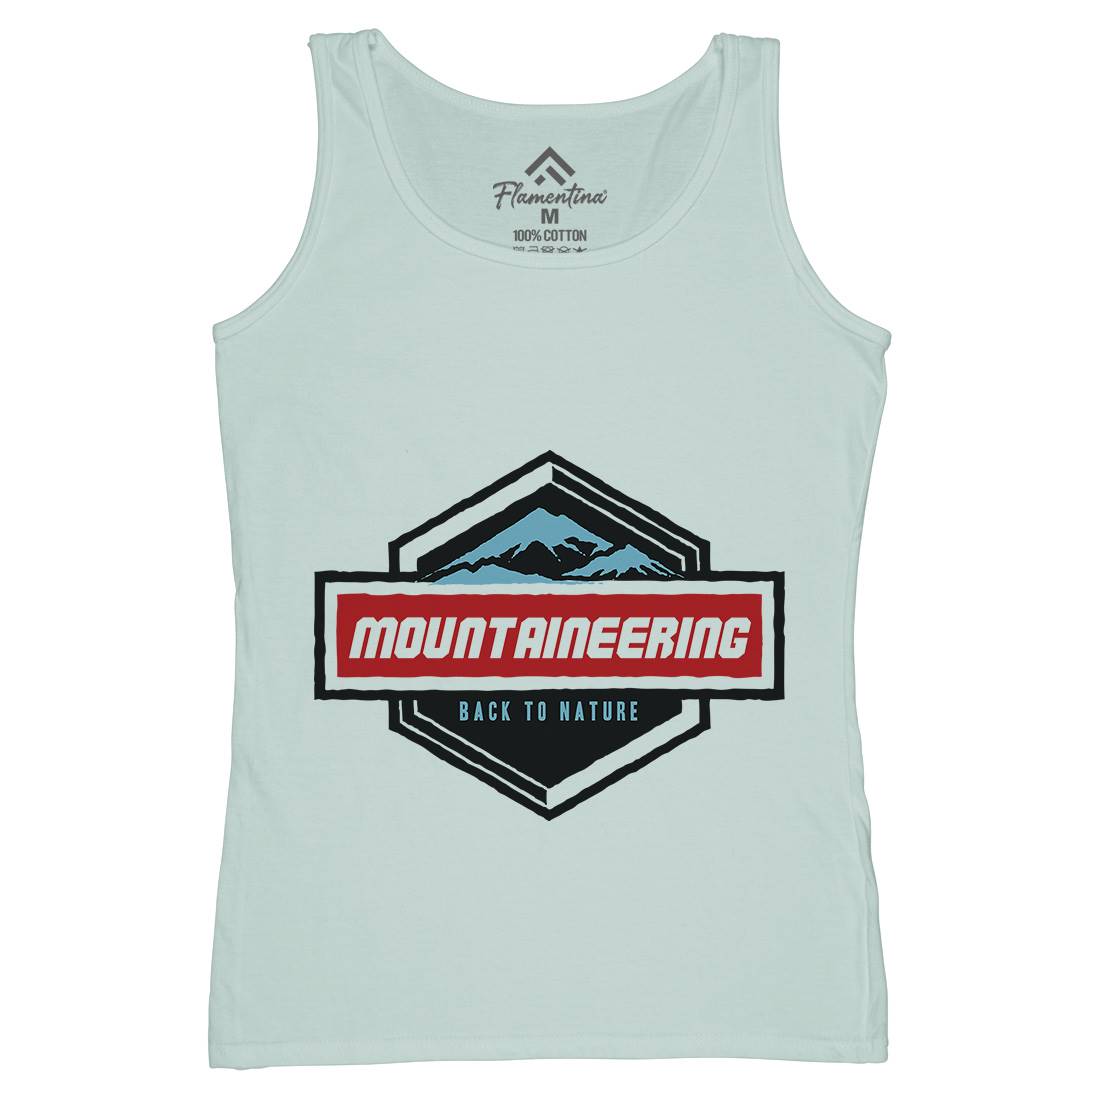 Mountaineering Womens Organic Tank Top Vest Nature A350